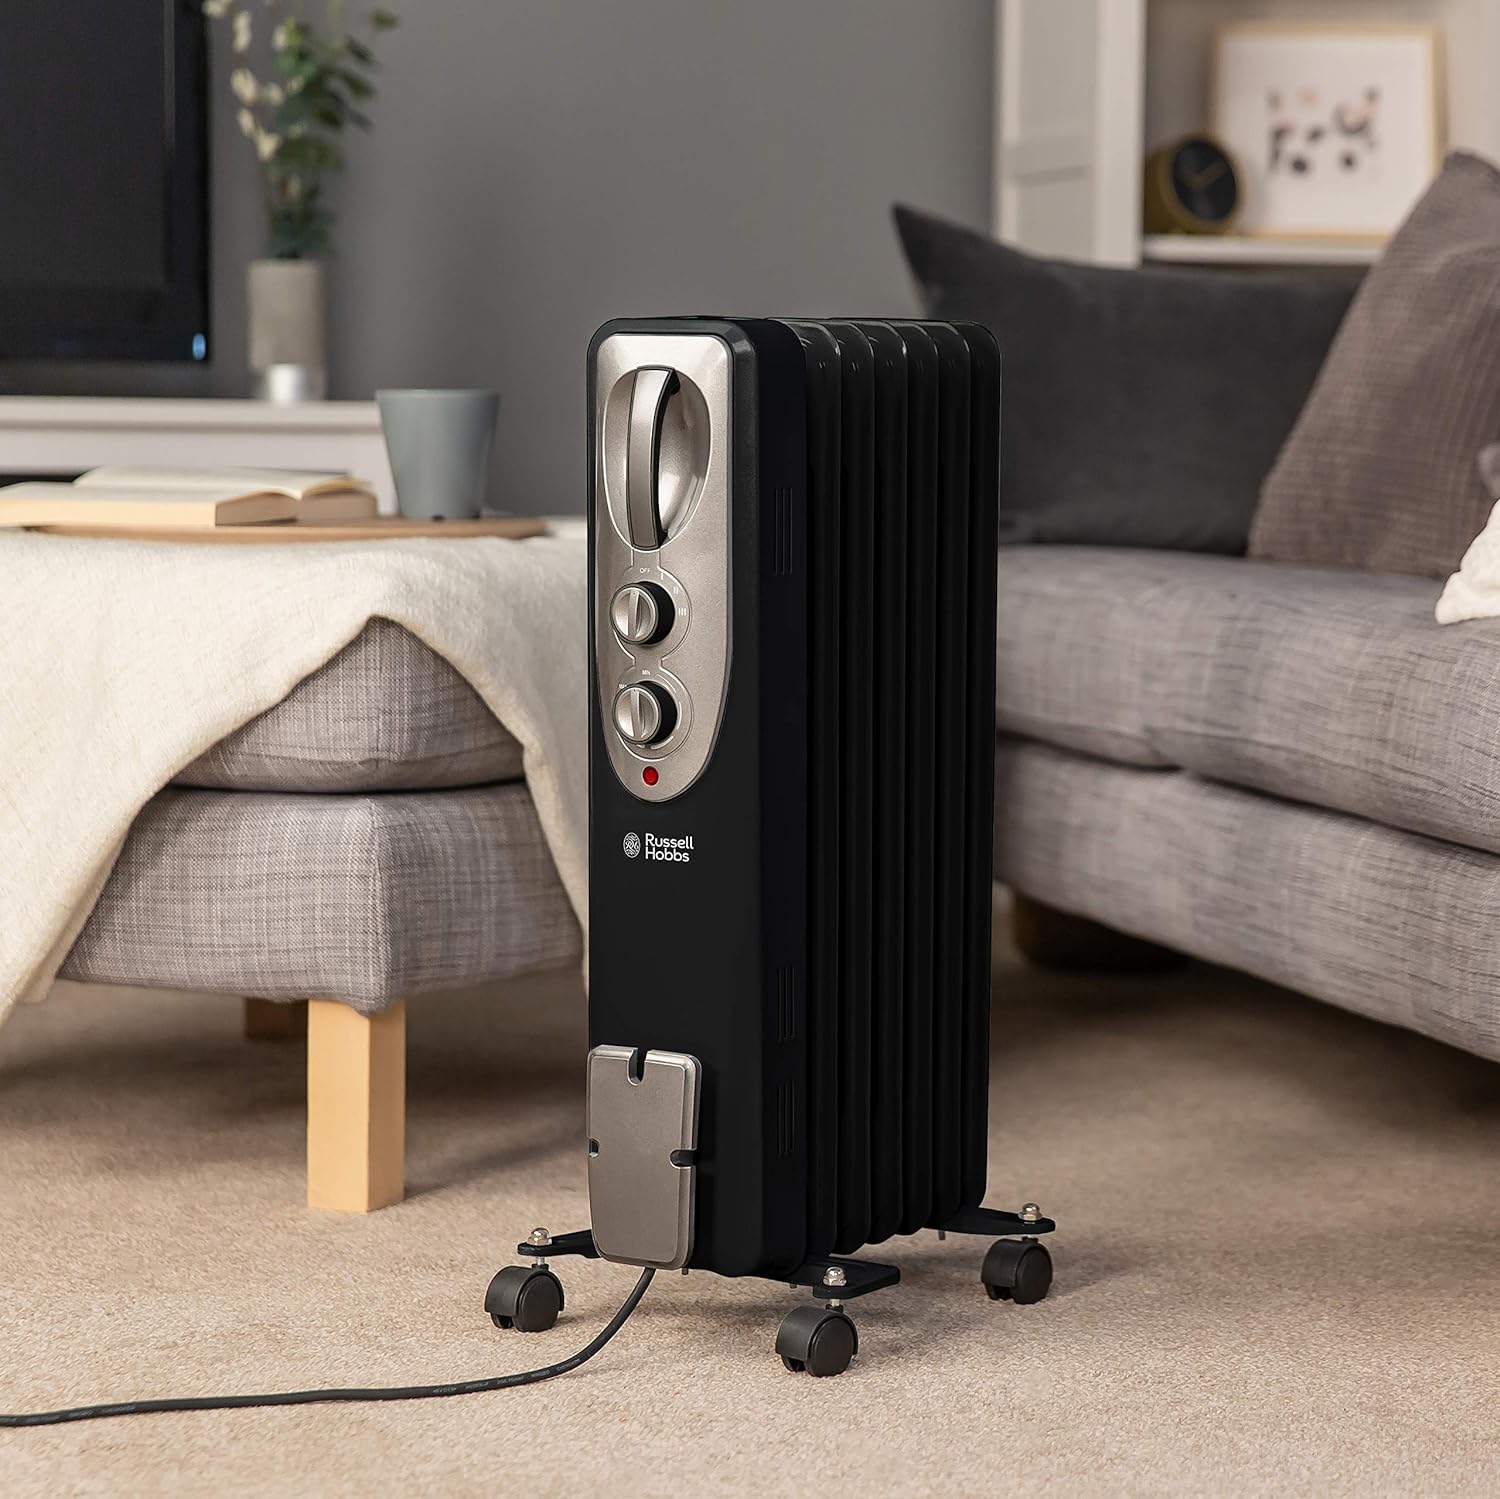 Russell Hobbs 1500W/1.5KW Oil Filled Radiator, 7 Fin Portable Electric Heater - Black, Adjustable Thermostat with 3 Heat Settings, Safety Cut-off, 15 m sq...